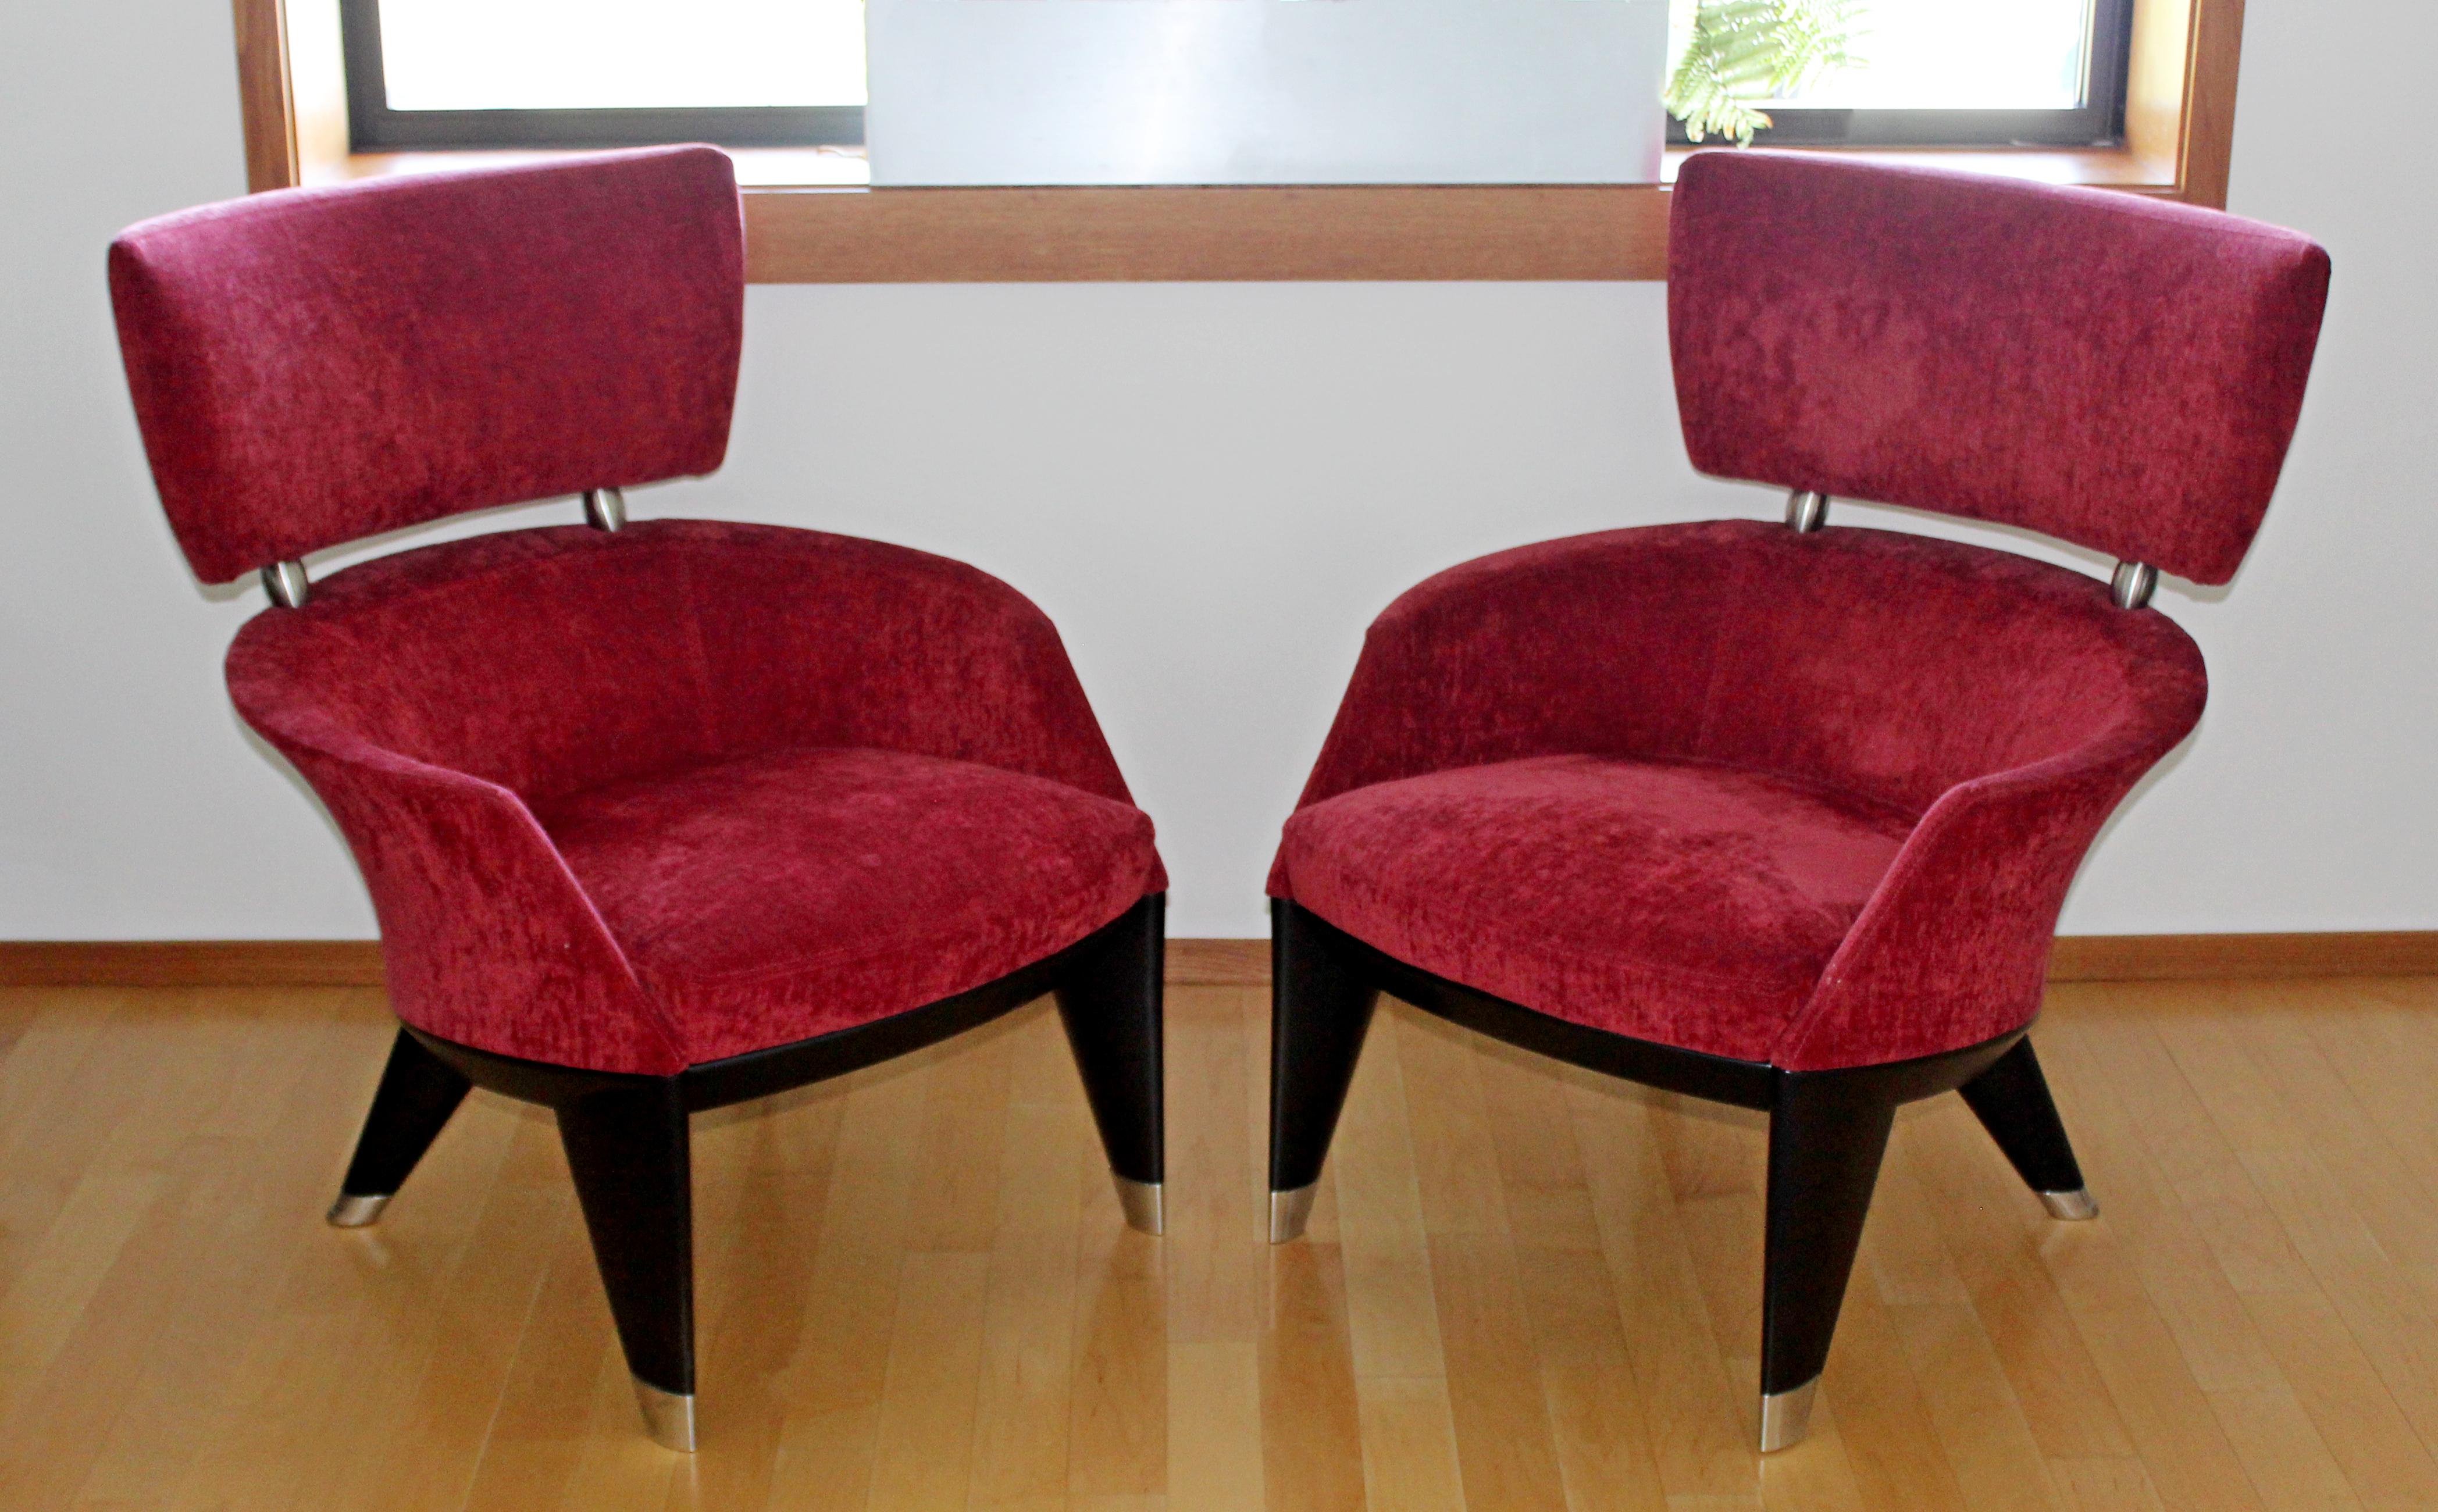 For your consideration is a magnificent pair of lounge armchairs, with rich red upholstery and on dark wooden bases, by Leon Krier for Italian company Giorgetti, circa 1990s. In great condition. The dimensions are 28